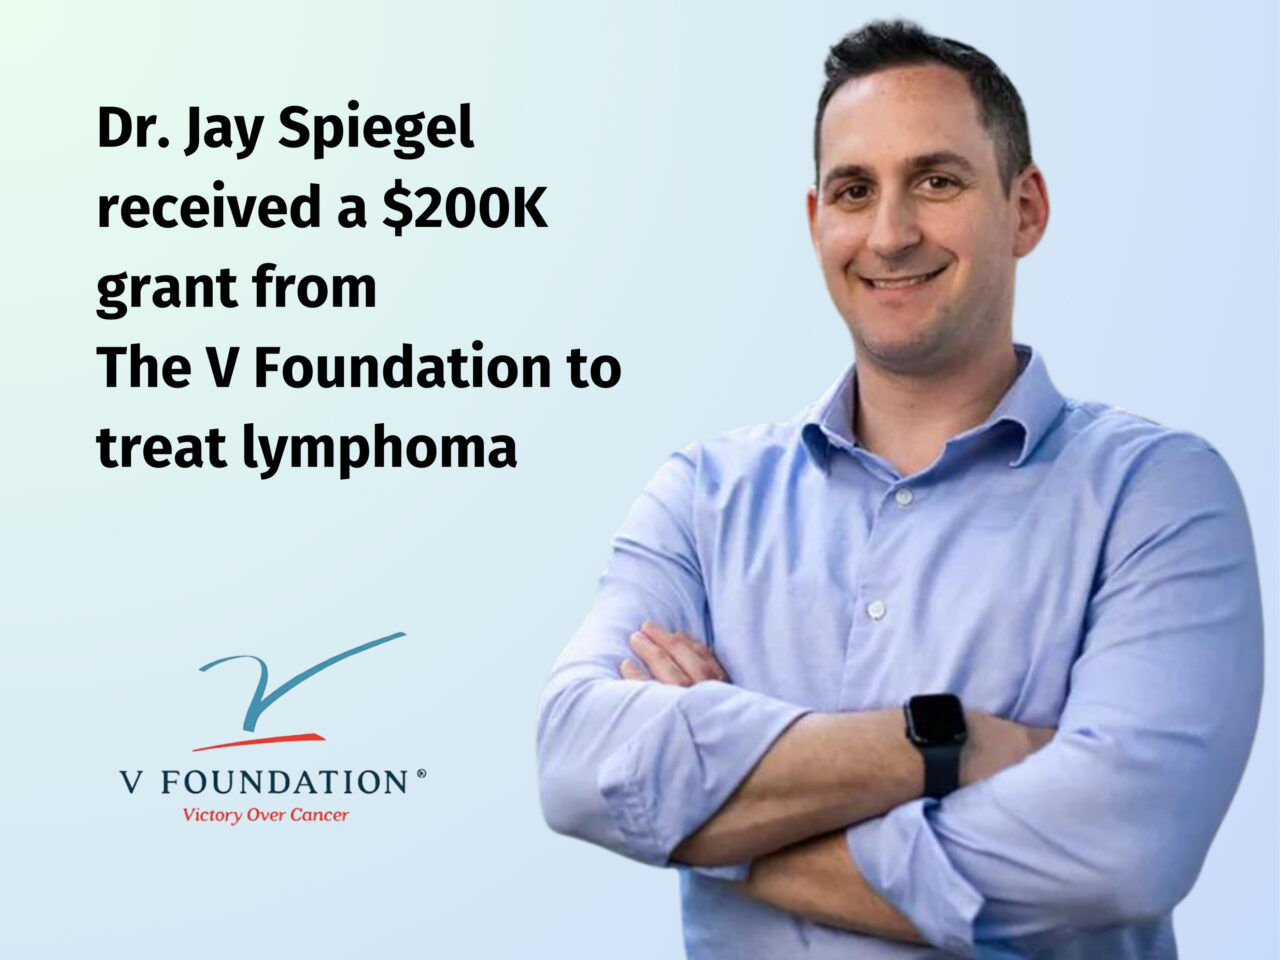 Dr. Jay Spiegel received a $200K grant from The V Foundation to treat lymphoma